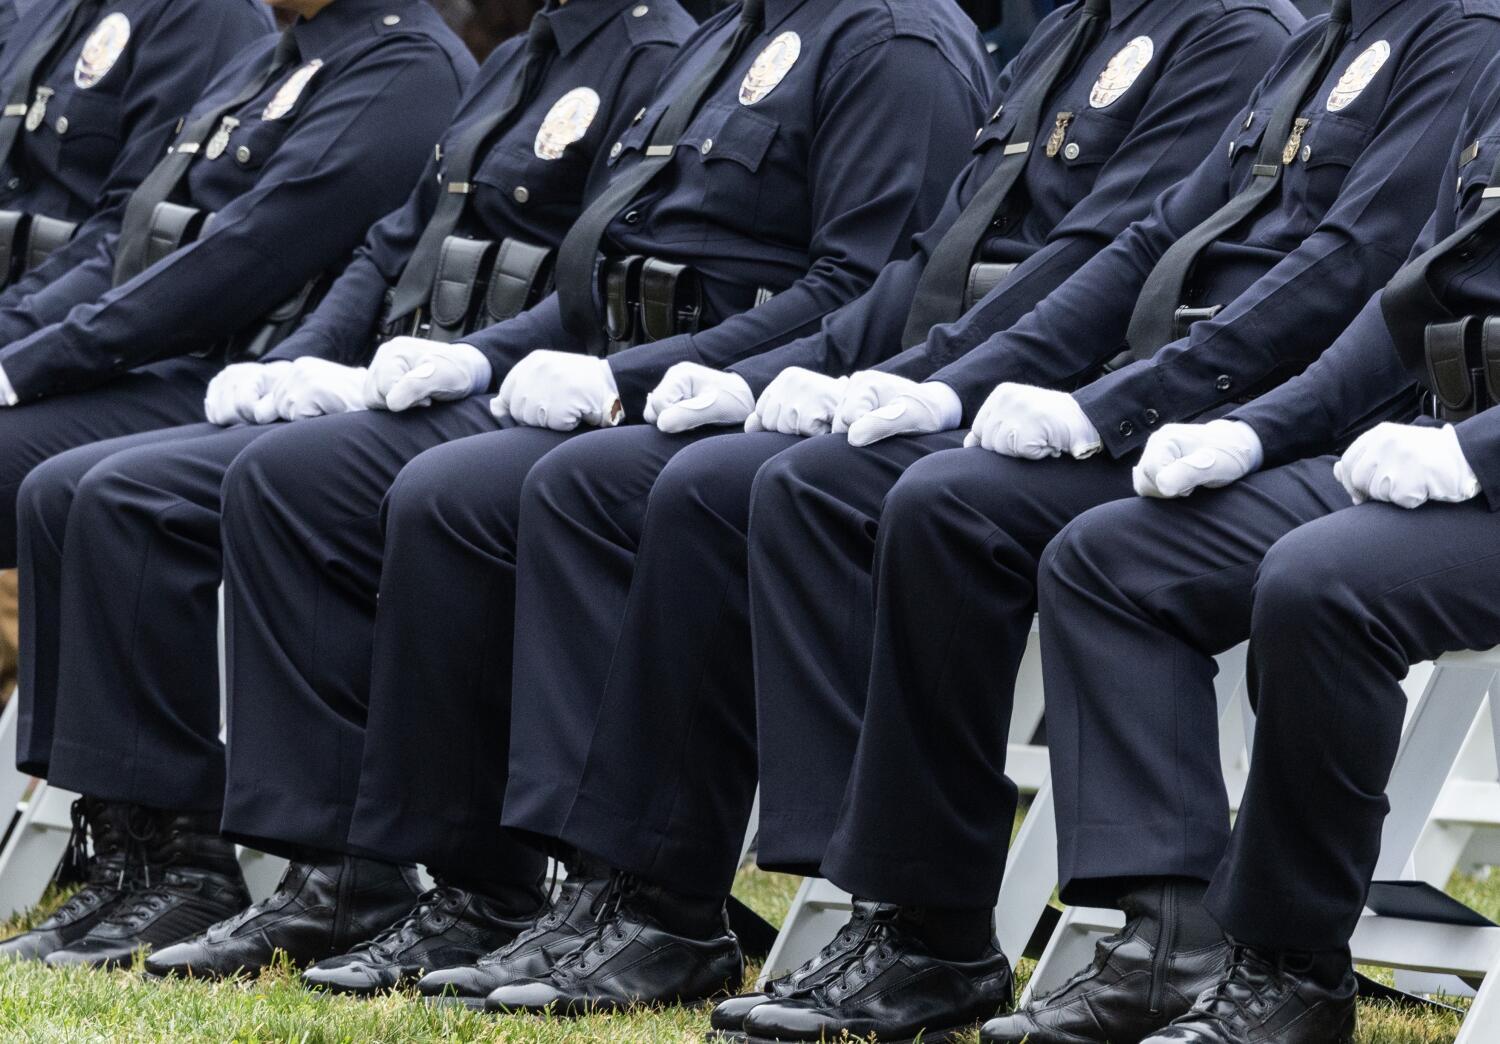 Police officers won't be forced to disclose their gender identity to state officials following lawsuit